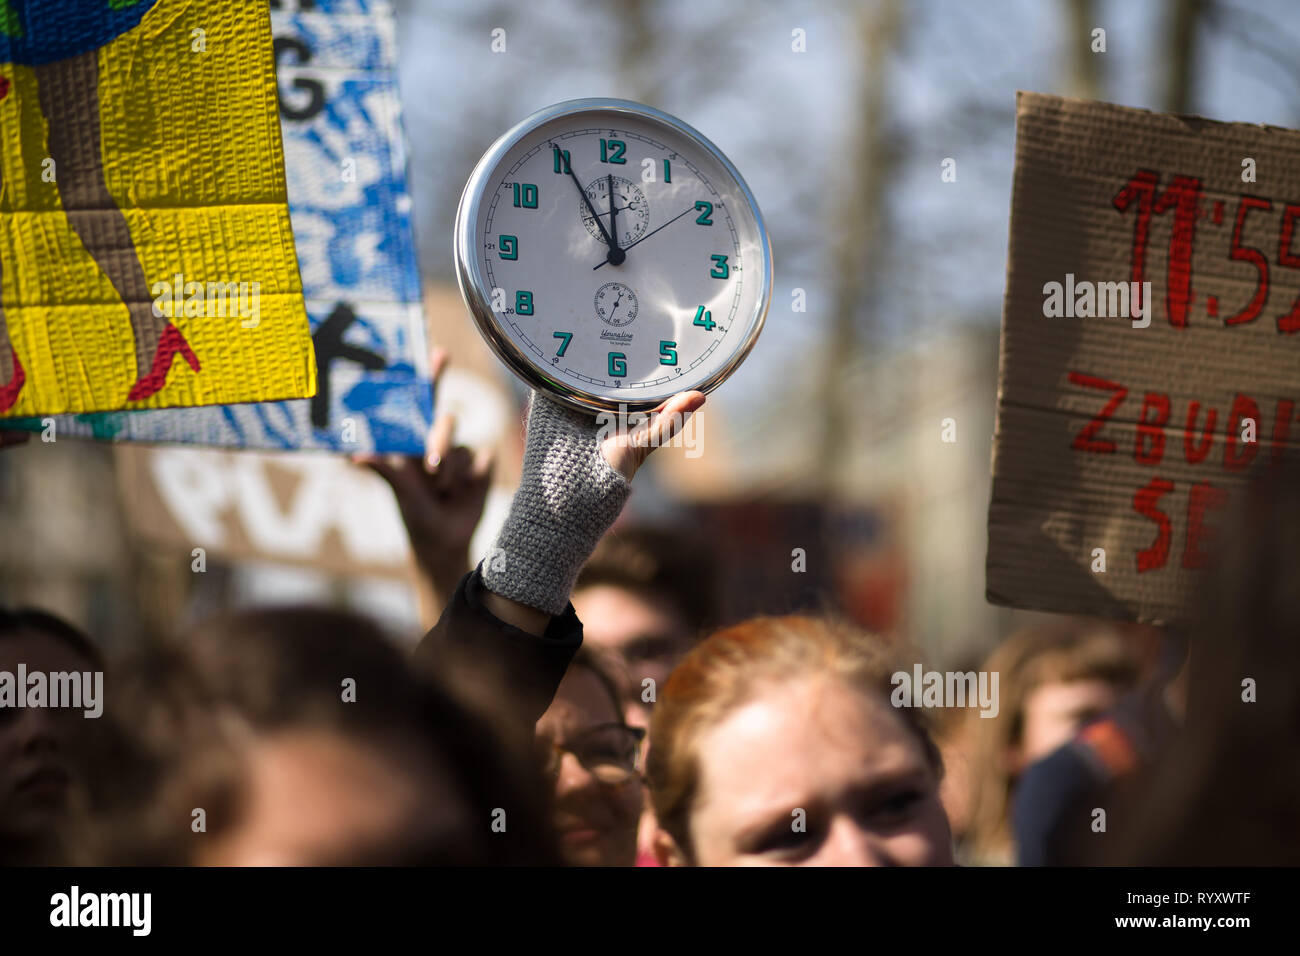 Beijing, Slovenia. 15th Mar, 2019. A protester holds up a clock that stands at 11:55, a symbolic high time to act, during a Youth Climate Strike in Ljubljana, Slovenia, on March 15, 2019. Around 5,000 students protested against inaction on climate change in Ljubljana, as part of a global Youth Climate Strike on Friday. Credit: Luka Dakskobler/Xinhua/Alamy Live News Stock Photo